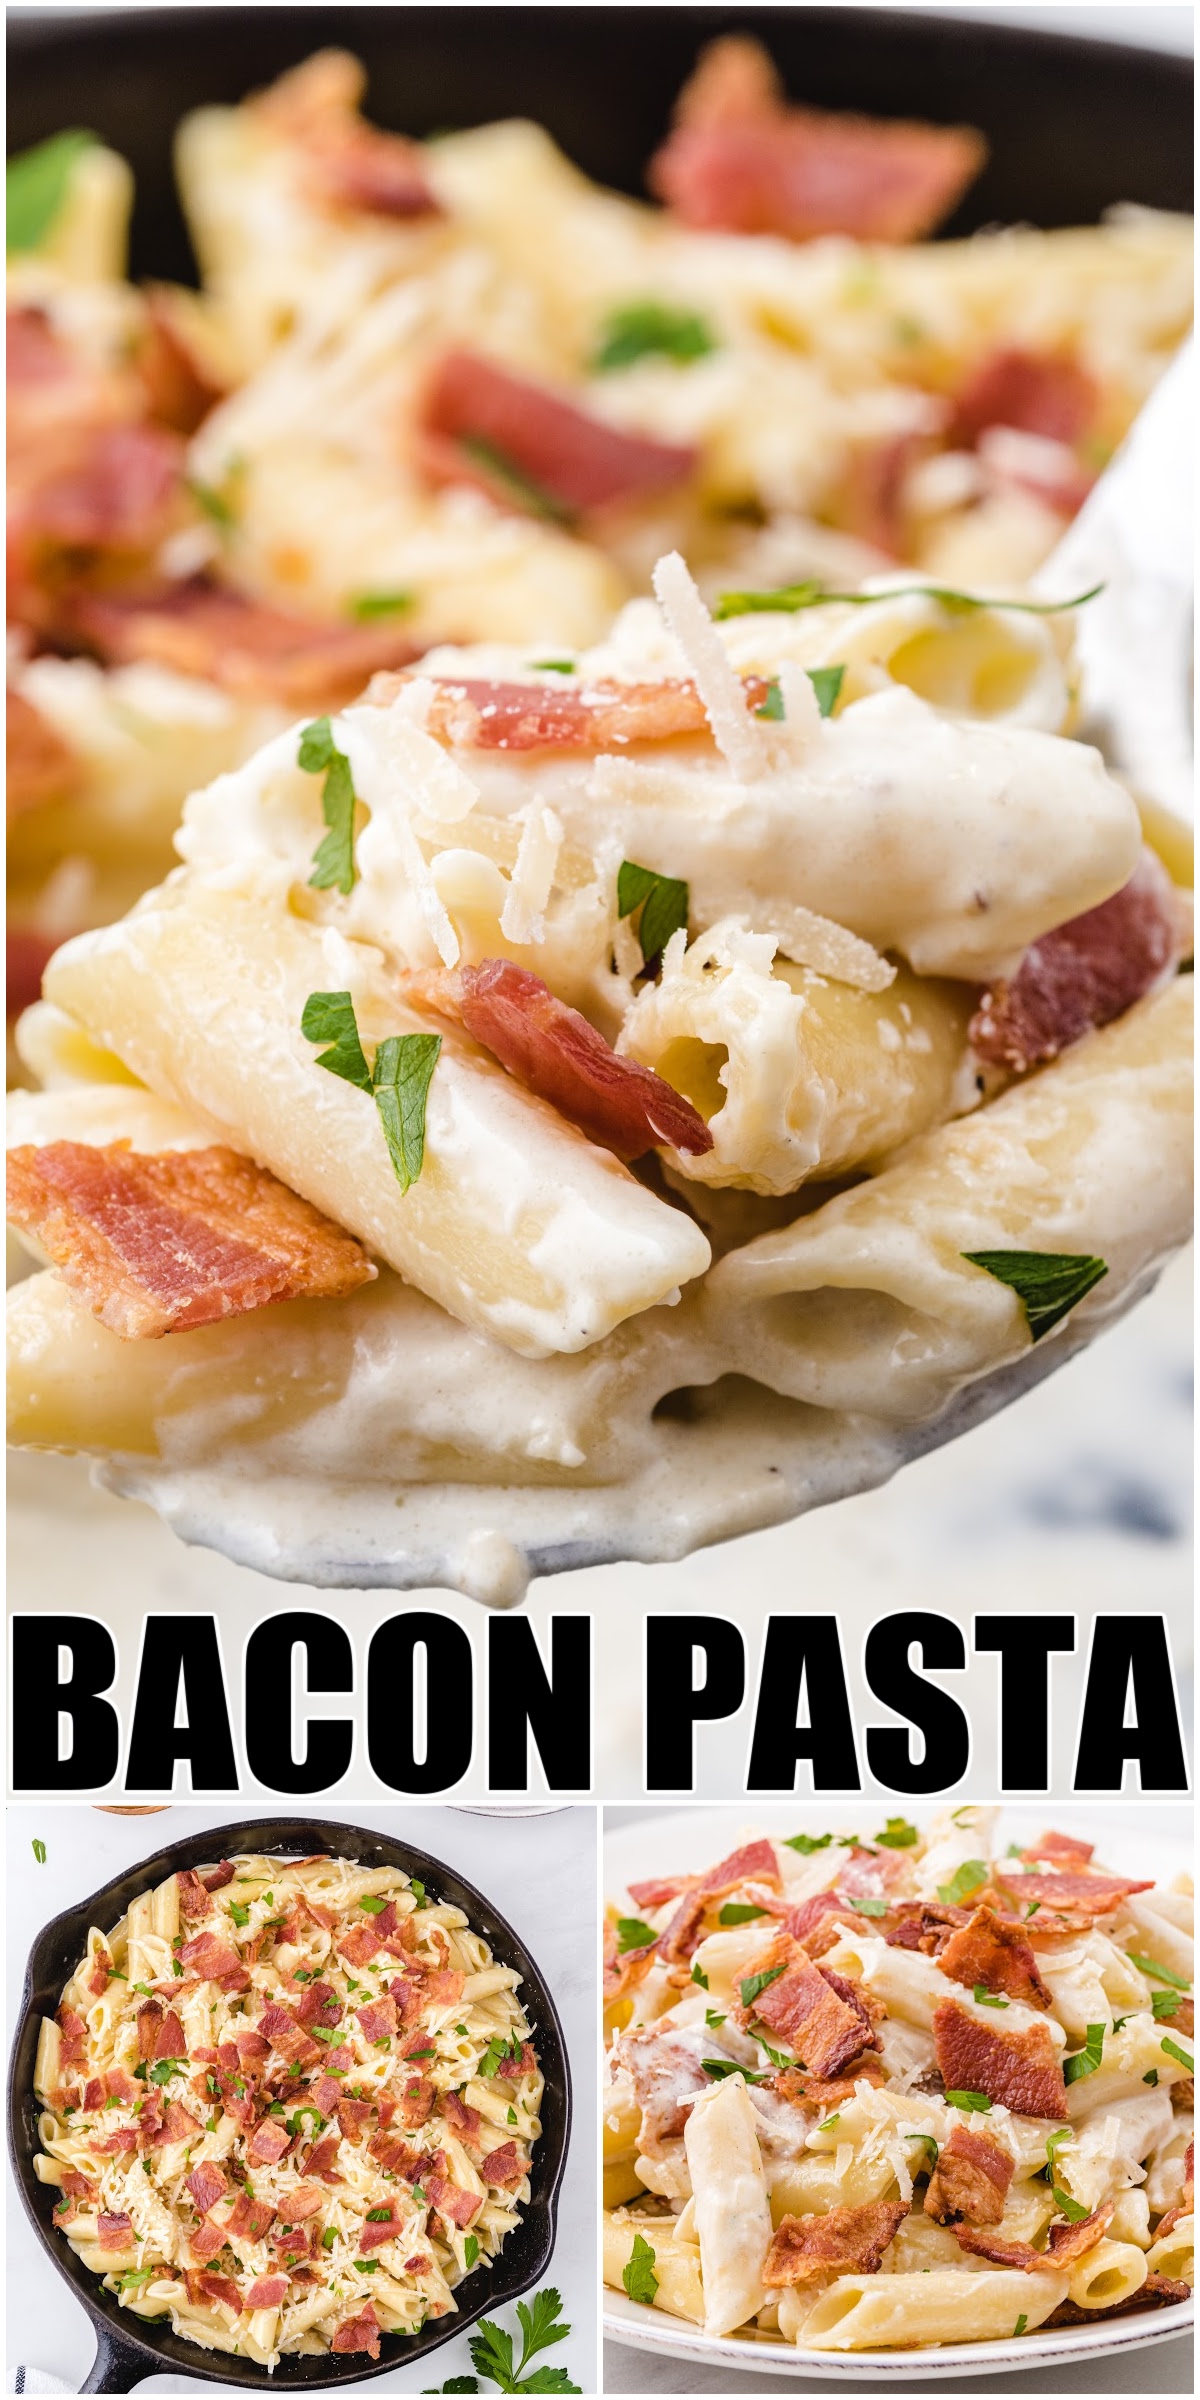 Bacon Pasta - The Best Blog Recipes